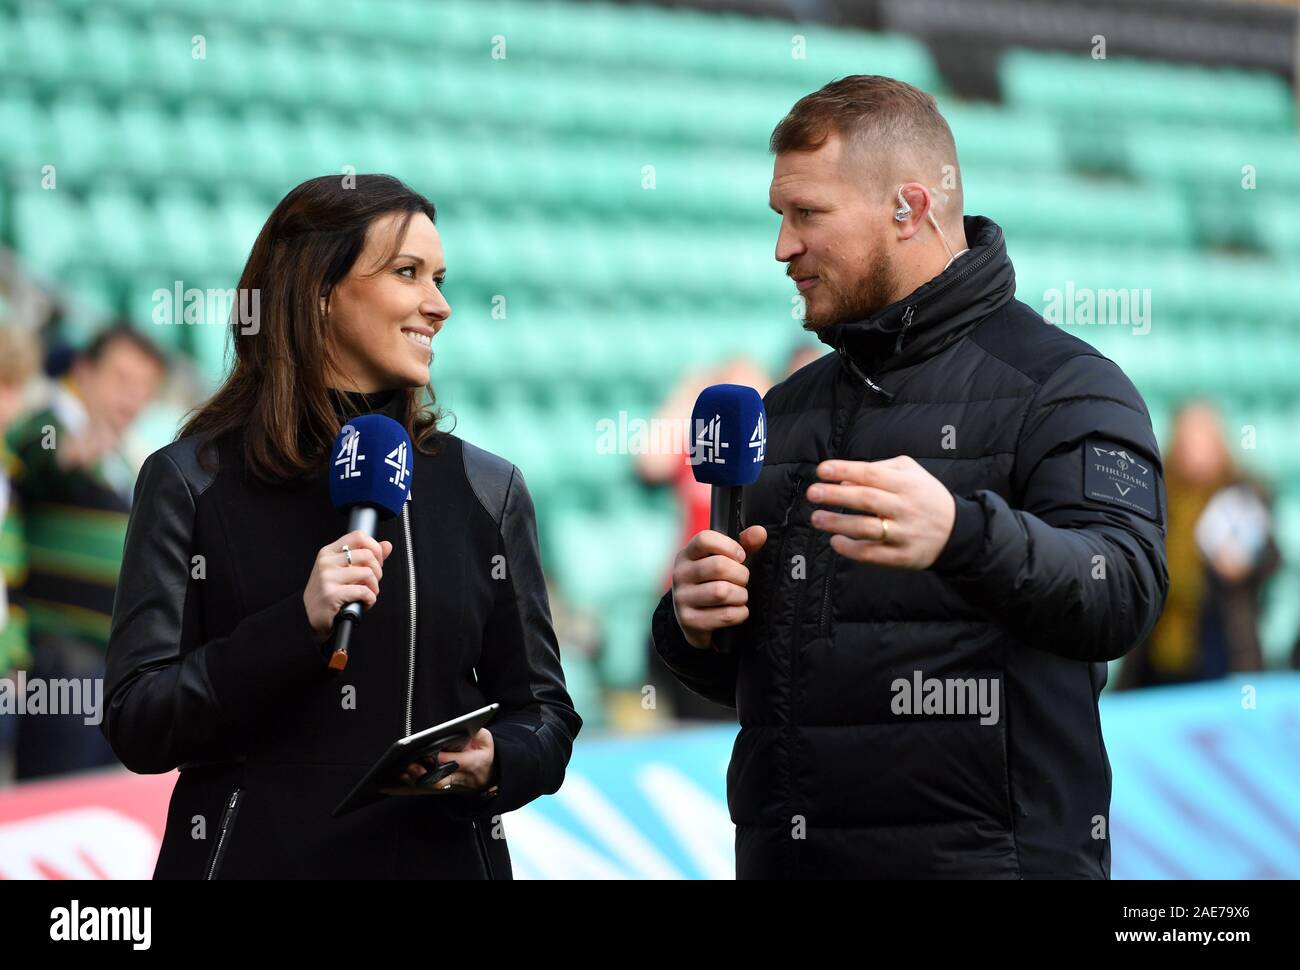 Channel 4 Presenter Lee McKenzie with former Northampton Saints and England player Dylan Hartley before the Heineken European Champions Cup pool one match between Northampton Saints and Leinster at Franklins Gardens, Northampton. Stock Photo